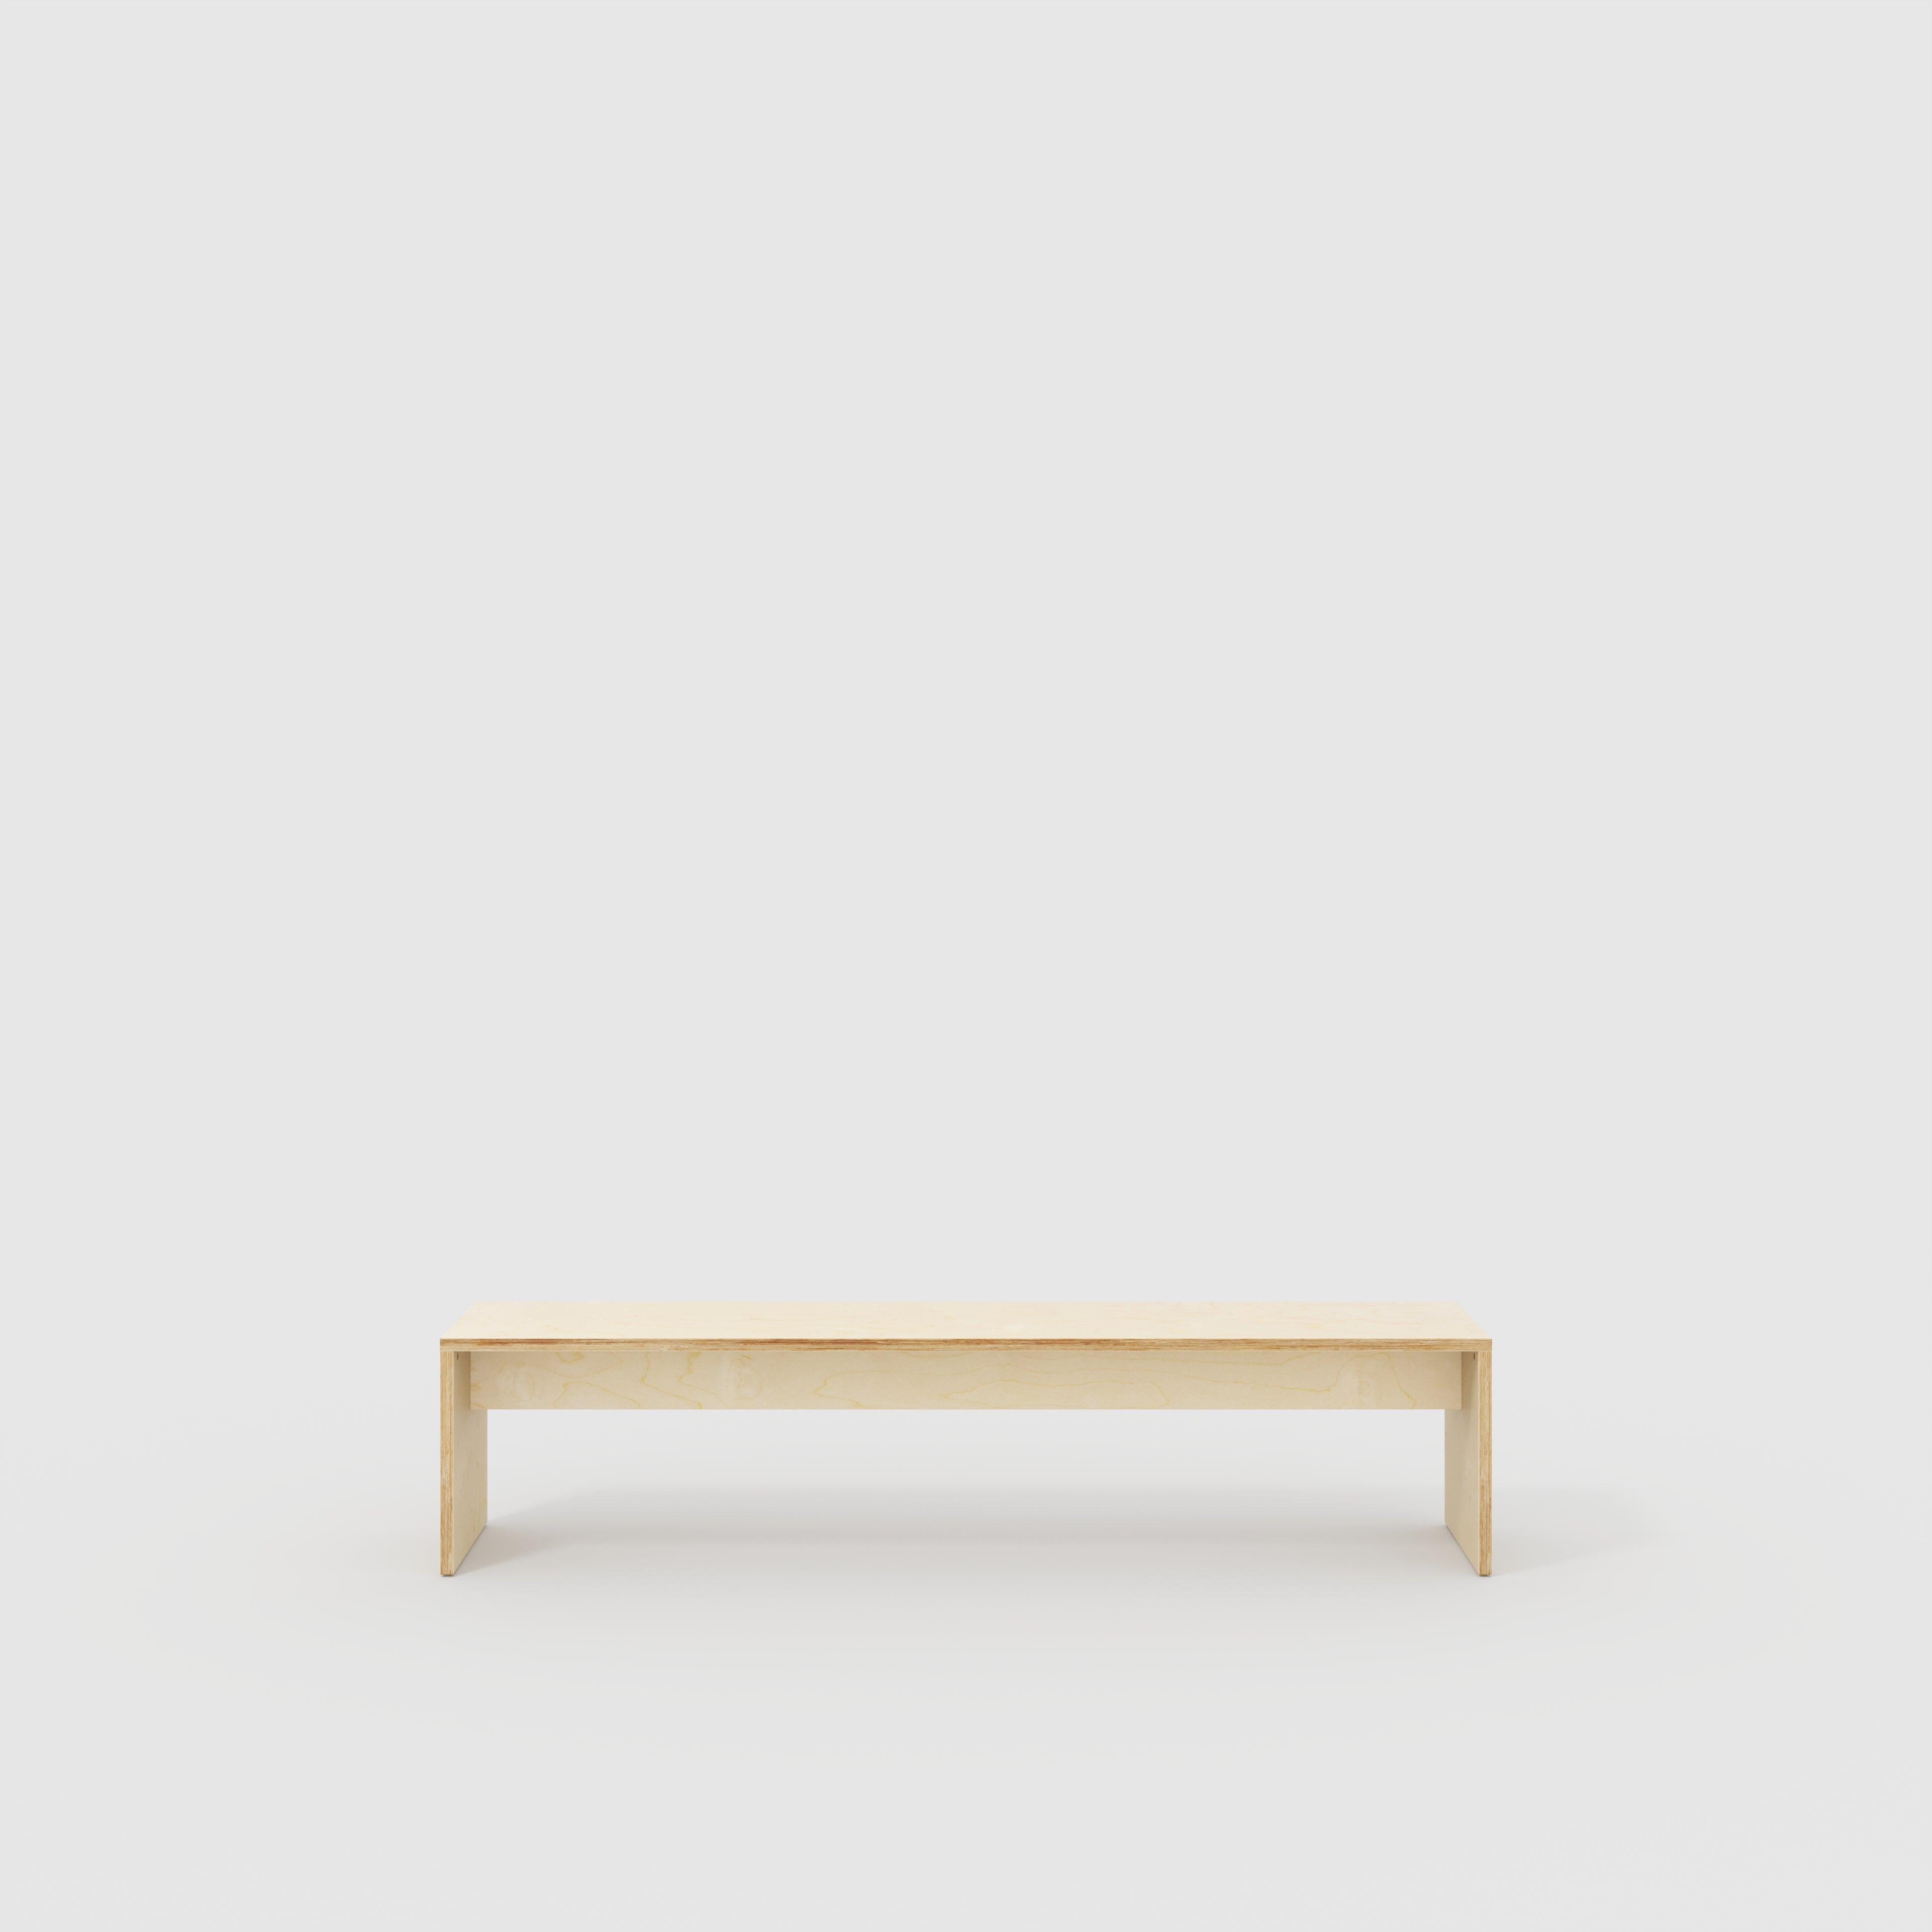 Bench Seat with Solid Sides - Plywood Birch - 2000(w) x 400(d)